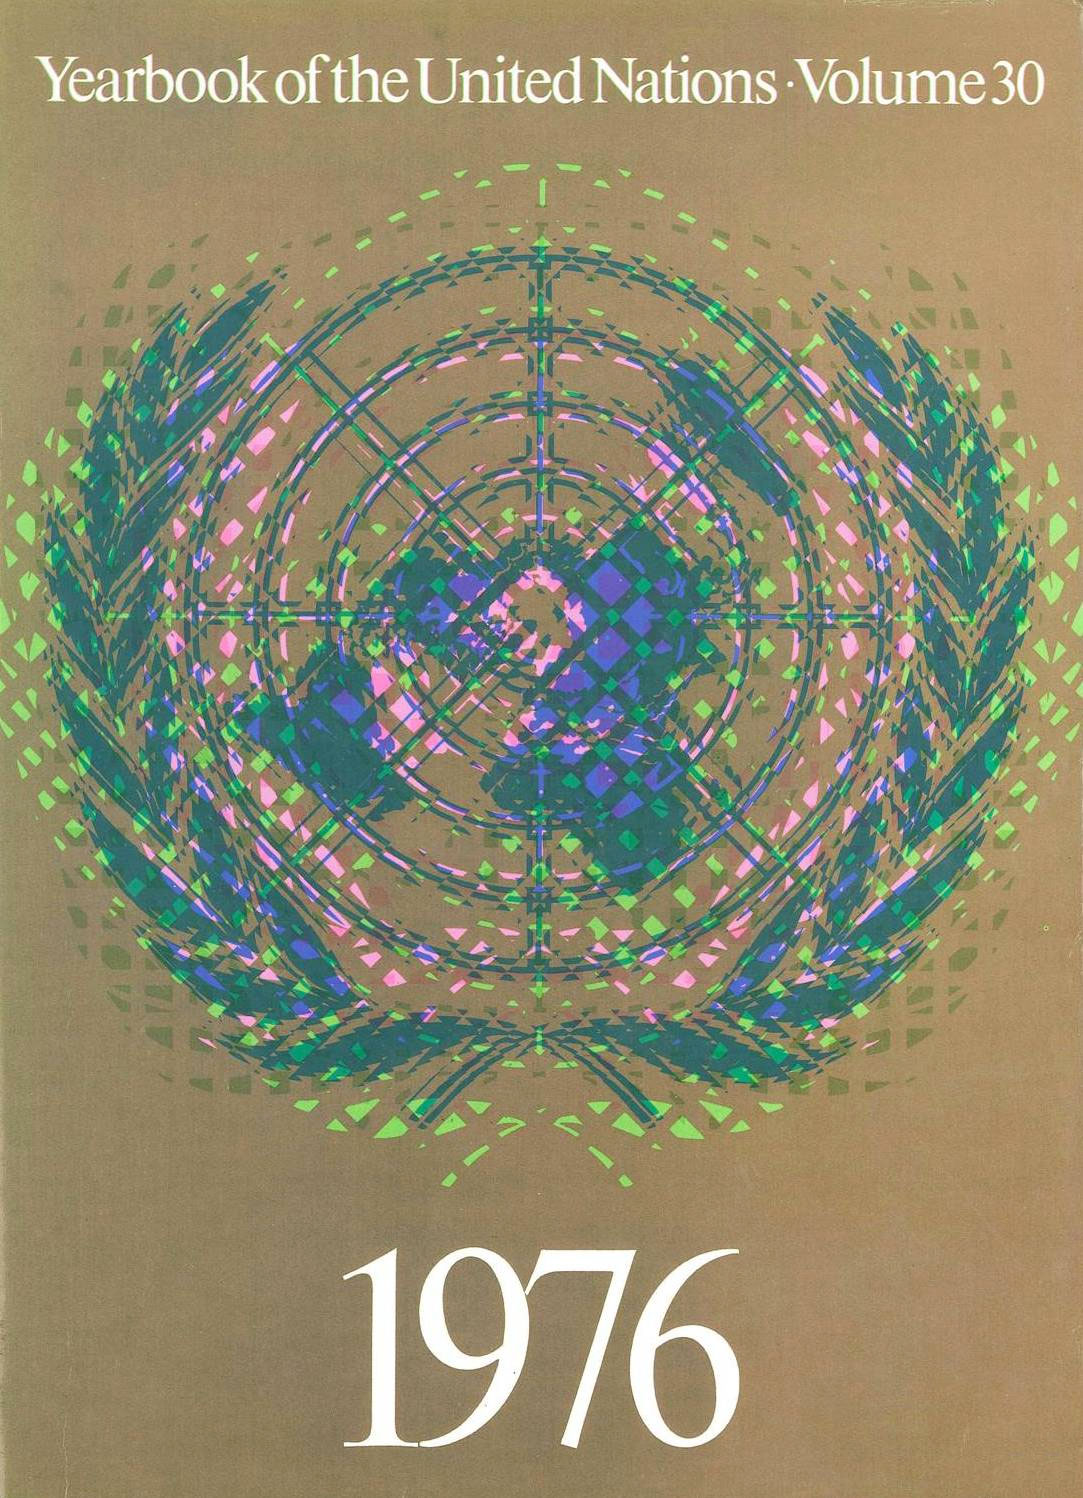 image of Yearbook of the United Nations 1976